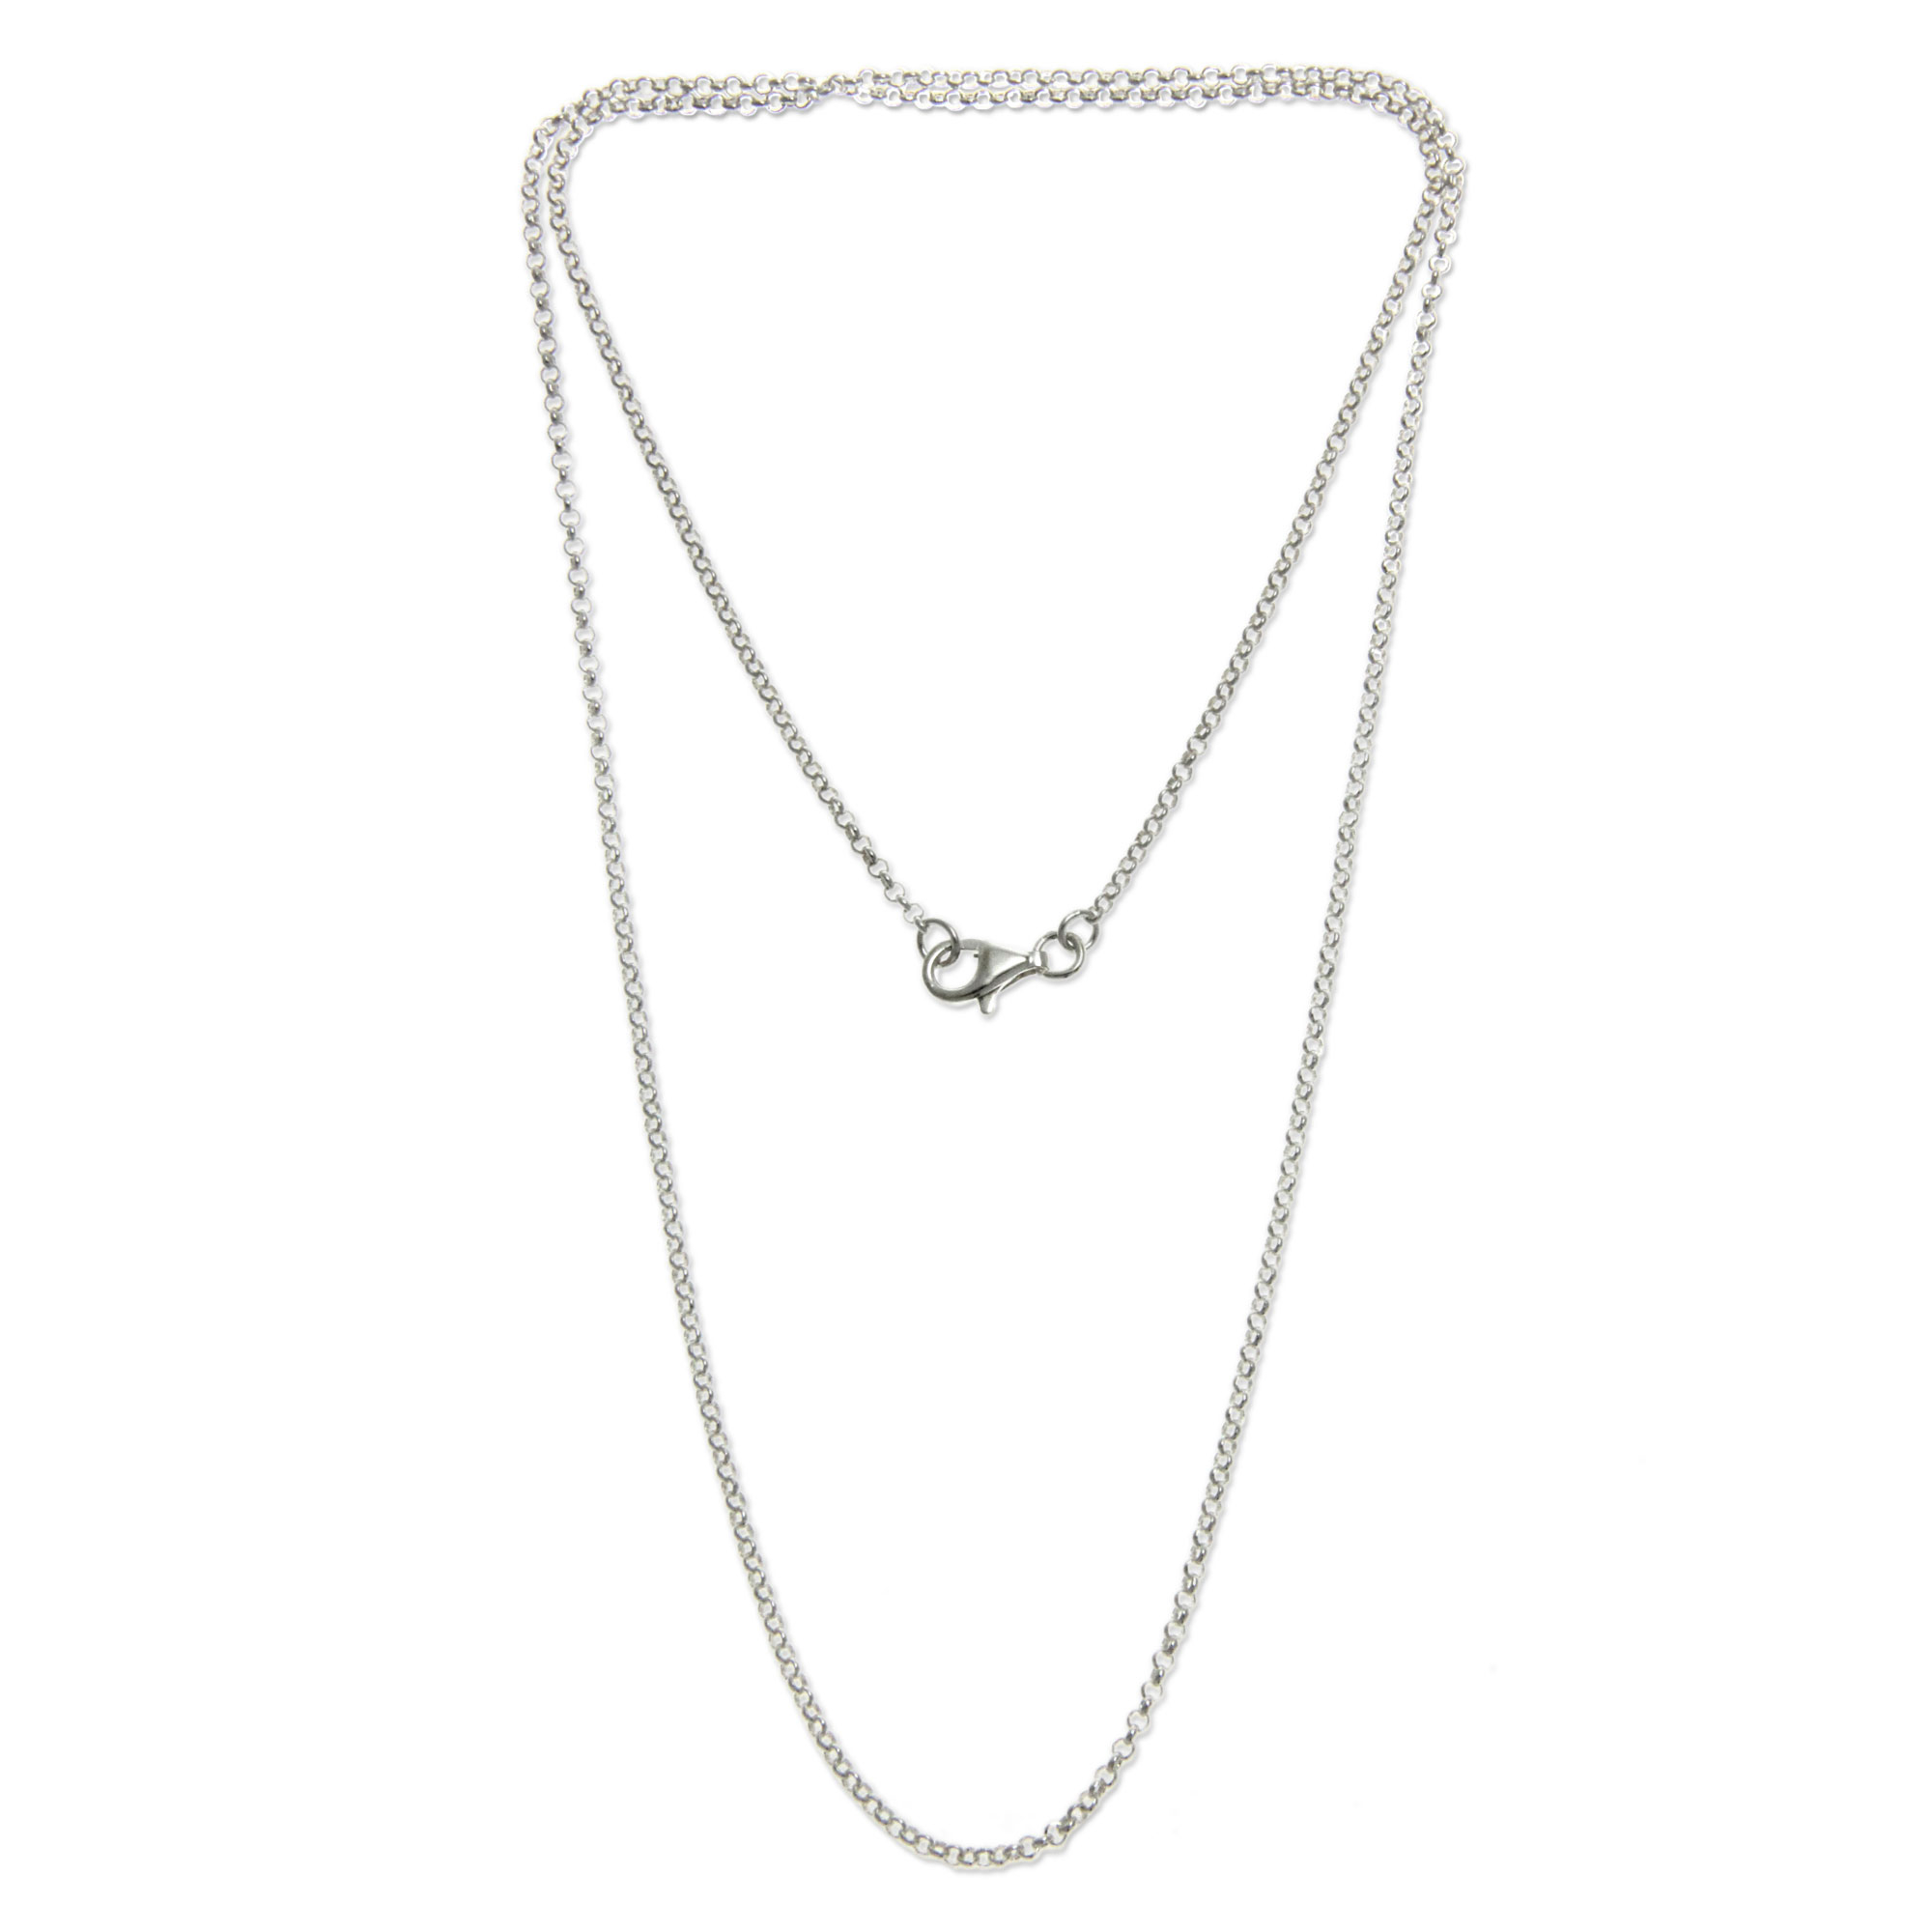 UNICEF Market | Sterling Silver Chain Necklace - Chain of Celebration